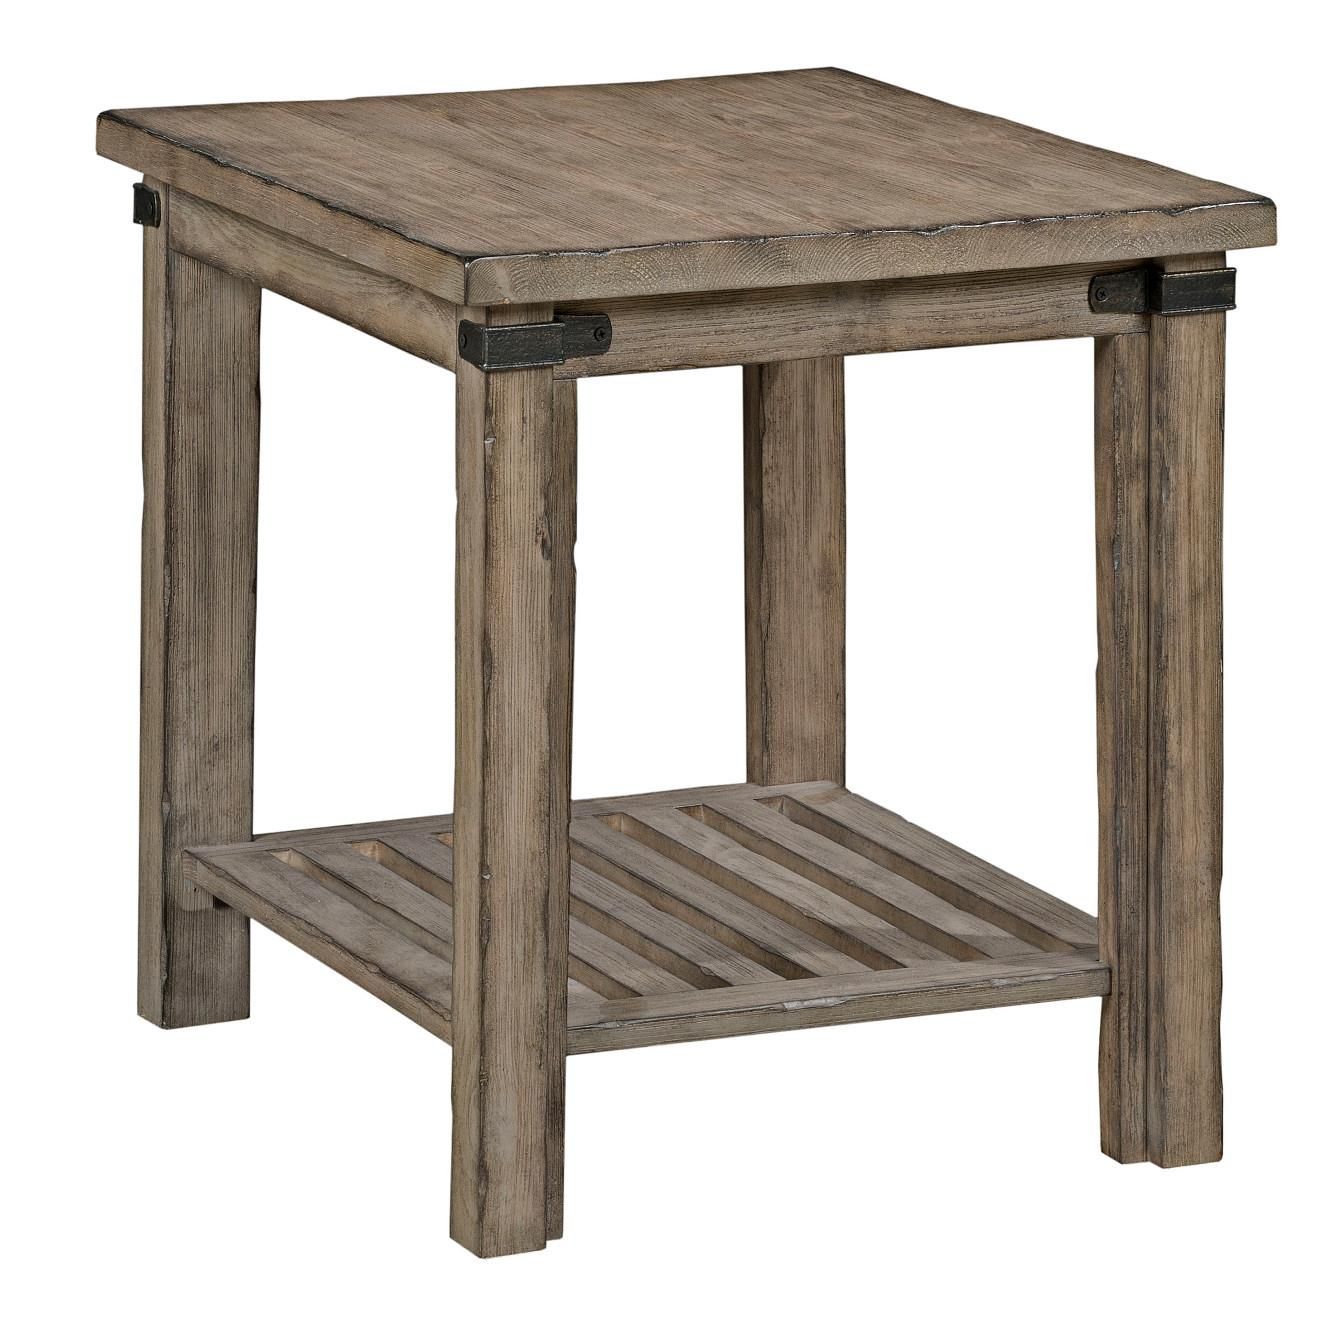 Kincaid Furniture Foundry Rustic Weathered Gray End Table | Belfort With Rustic Gray End Tables (View 6 of 20)